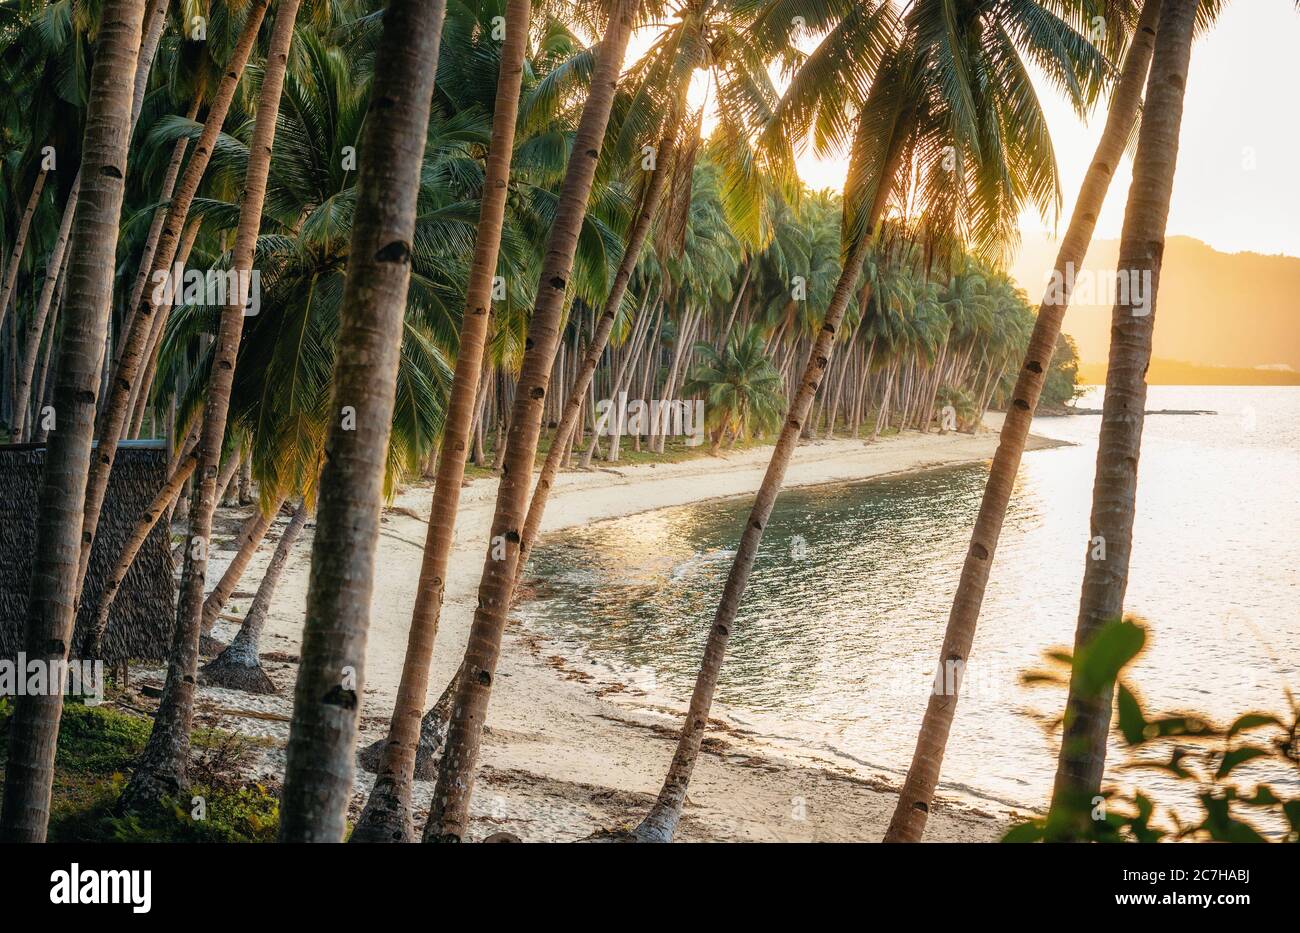 Jungle with palm trees on Coconut Beach in Port Barton, Palawan, Philippines Stock Photo